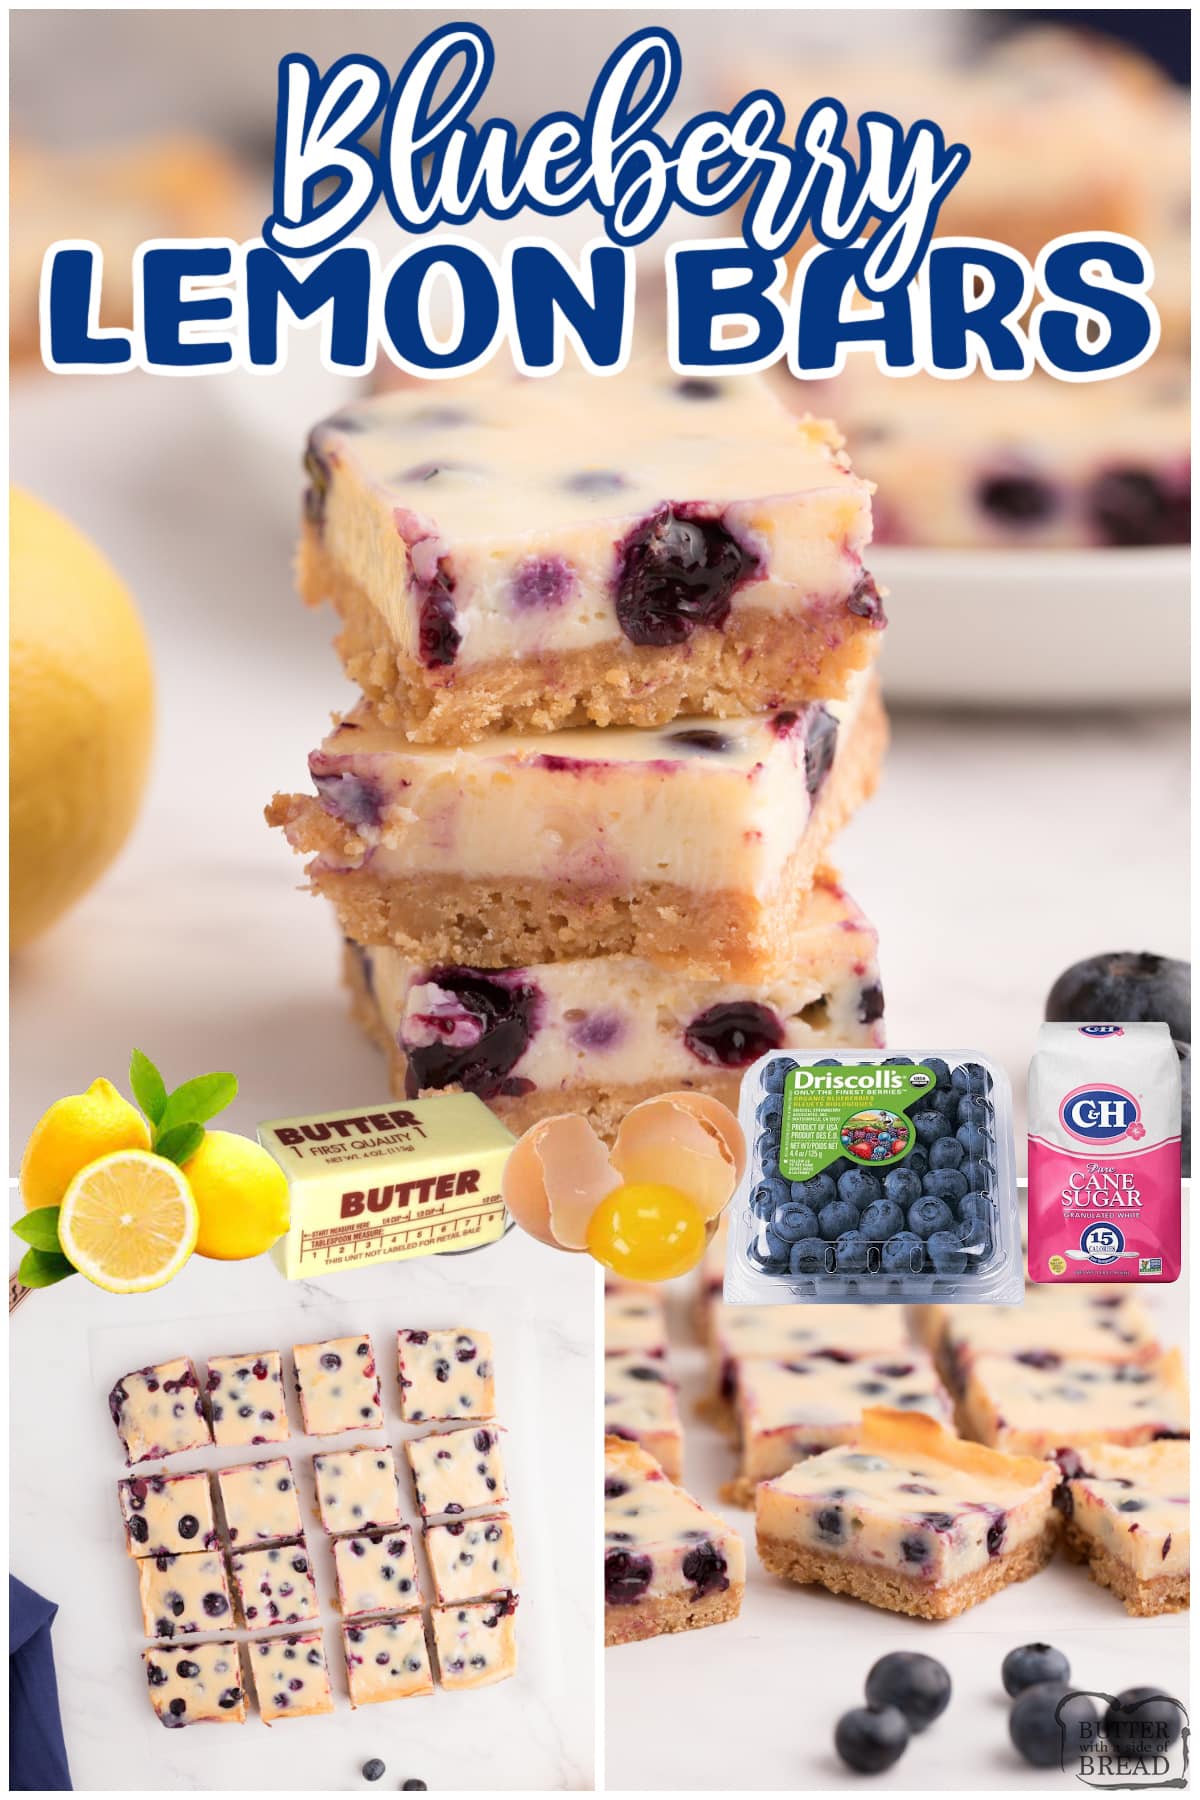 Blueberry Lemon Bars add a fun twist to the classic lemon bar recipe. The crust is made with graham cracker crumbs, which is topped with a creamy lemon layer filled with fresh blueberries.